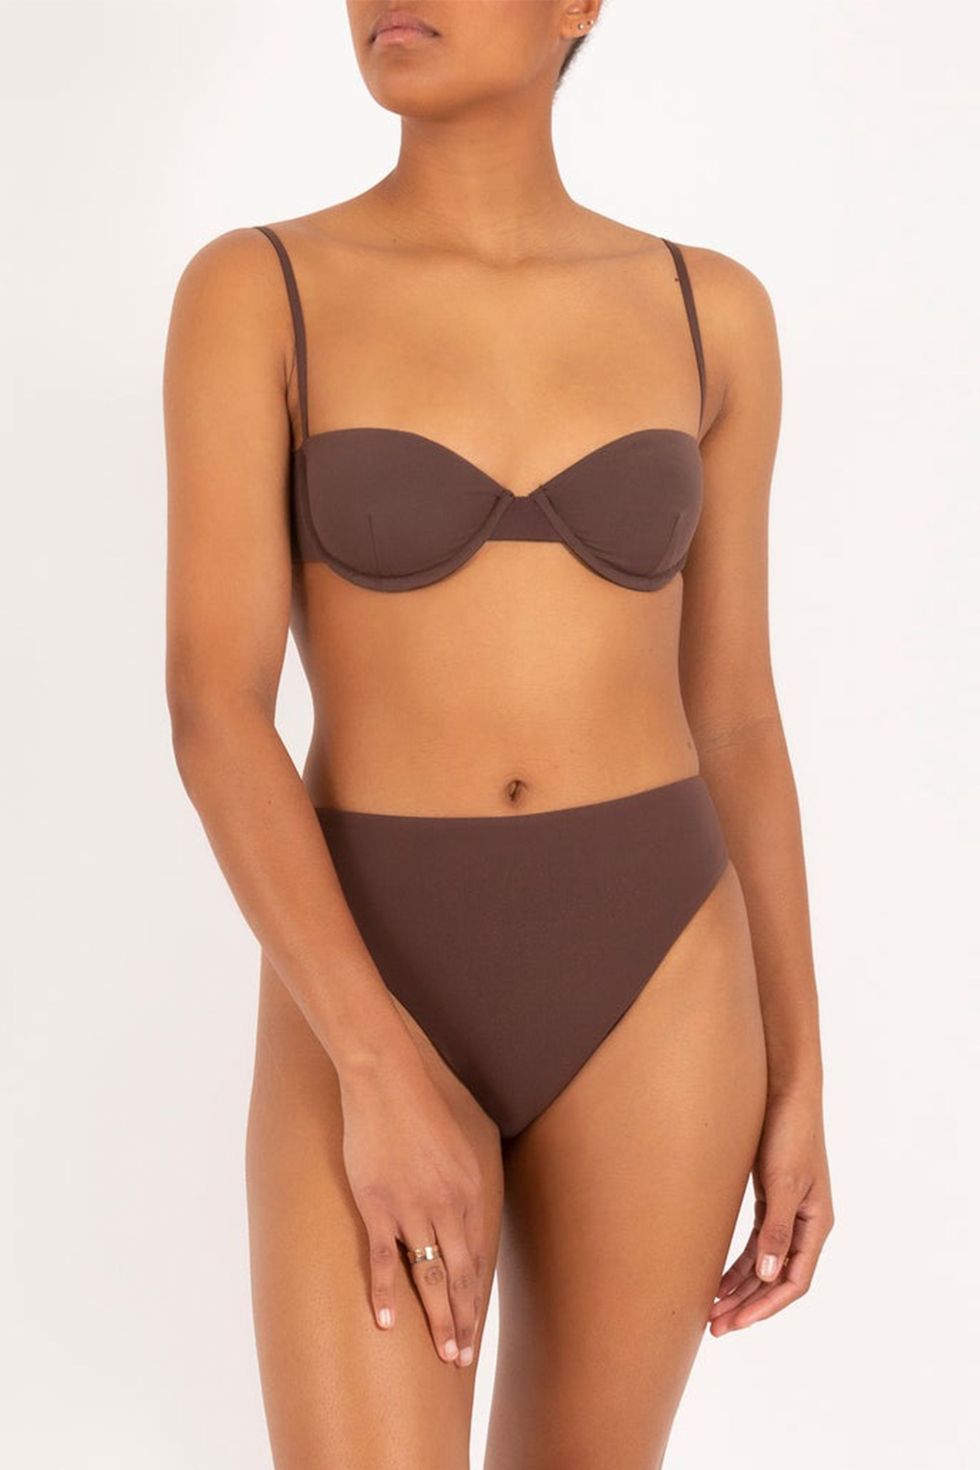 Shop Flat Chested Swimsuit with great discounts and prices online